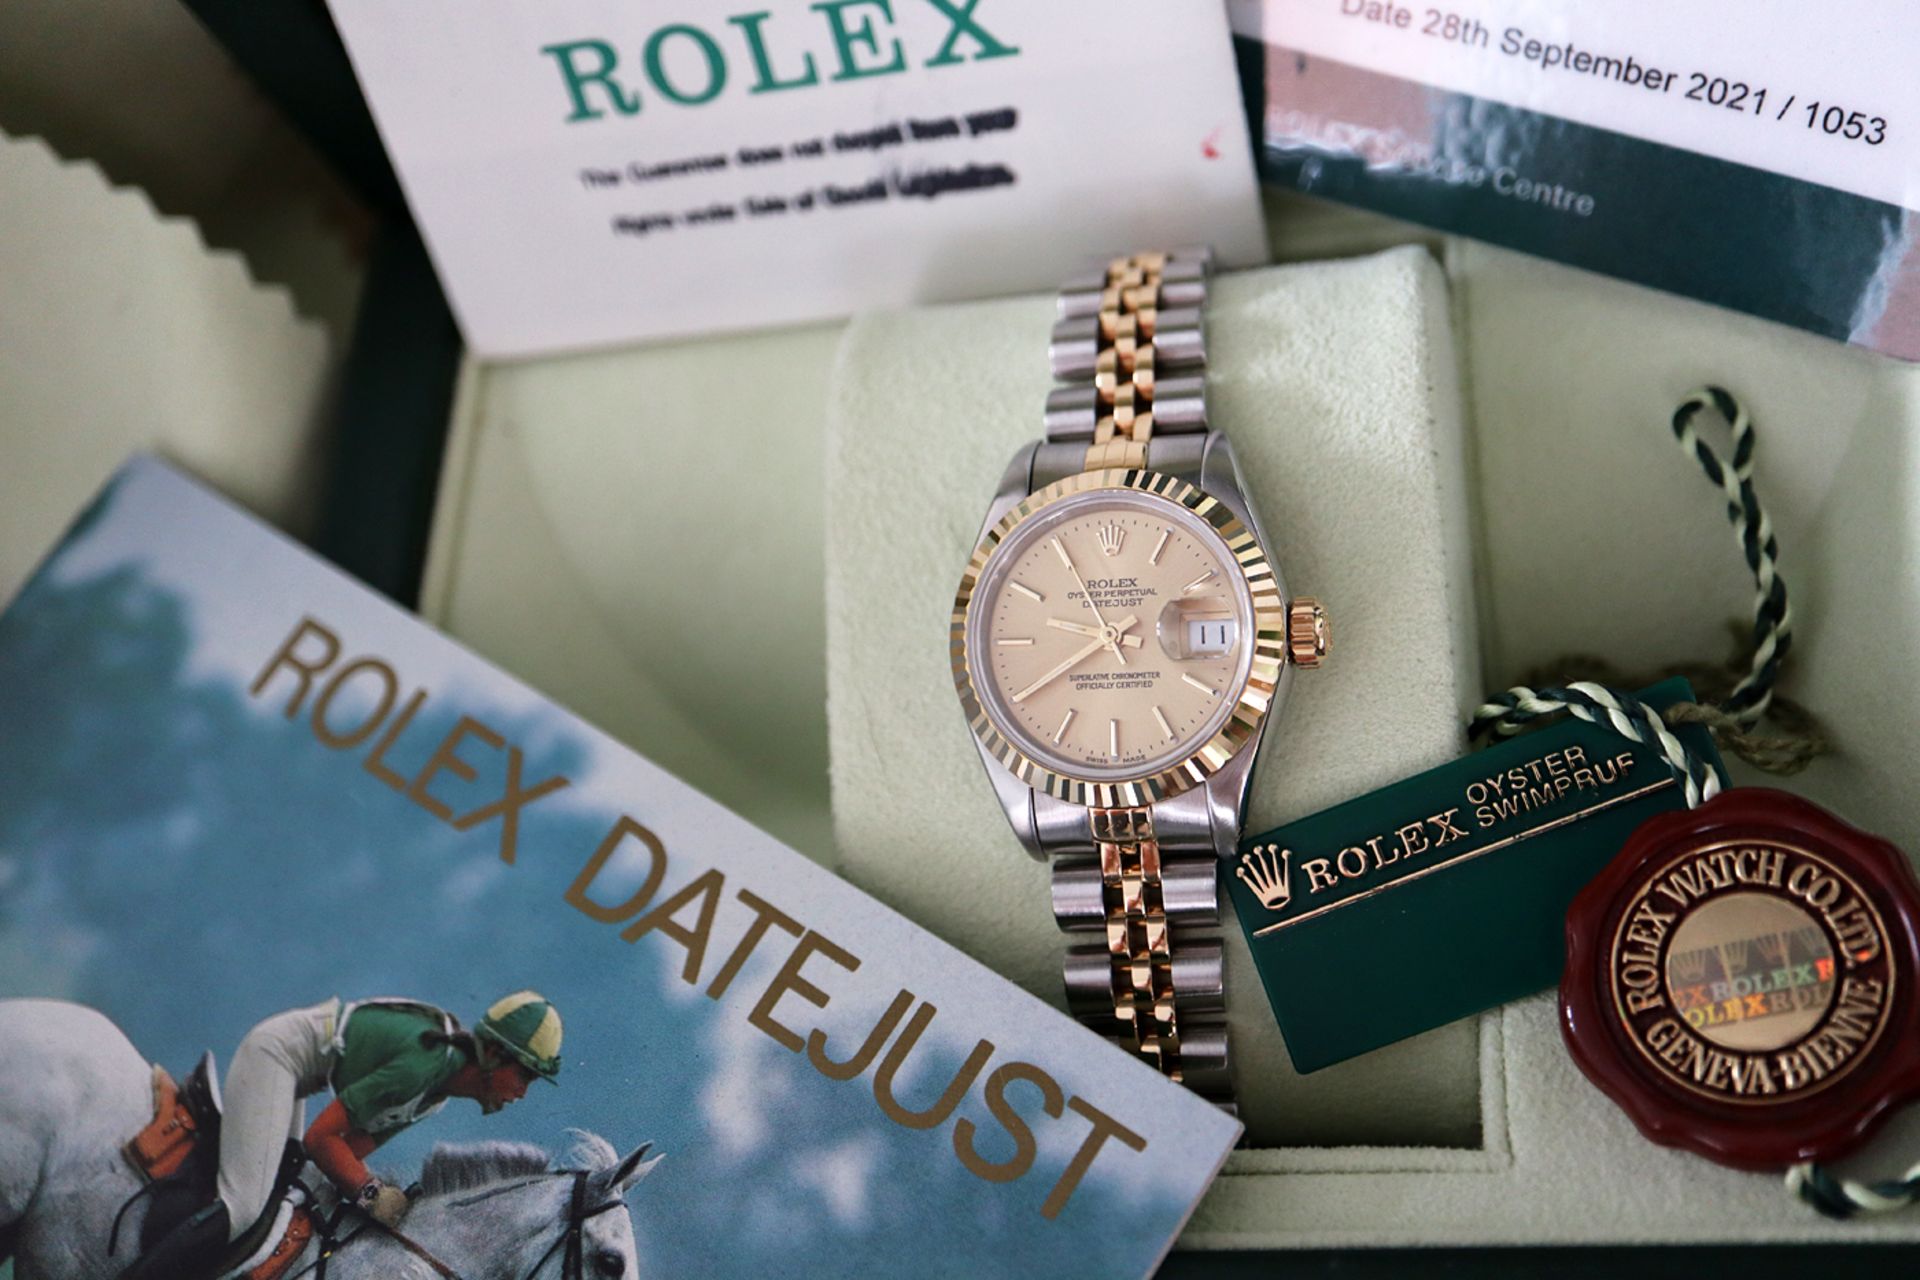 ROLEX DATEJUST 18K / STEEL REF. 69173 *CHAMPAGNE* - FULL SET WITH CERTIFICATE, BOX & TAGS ETC - Image 8 of 9